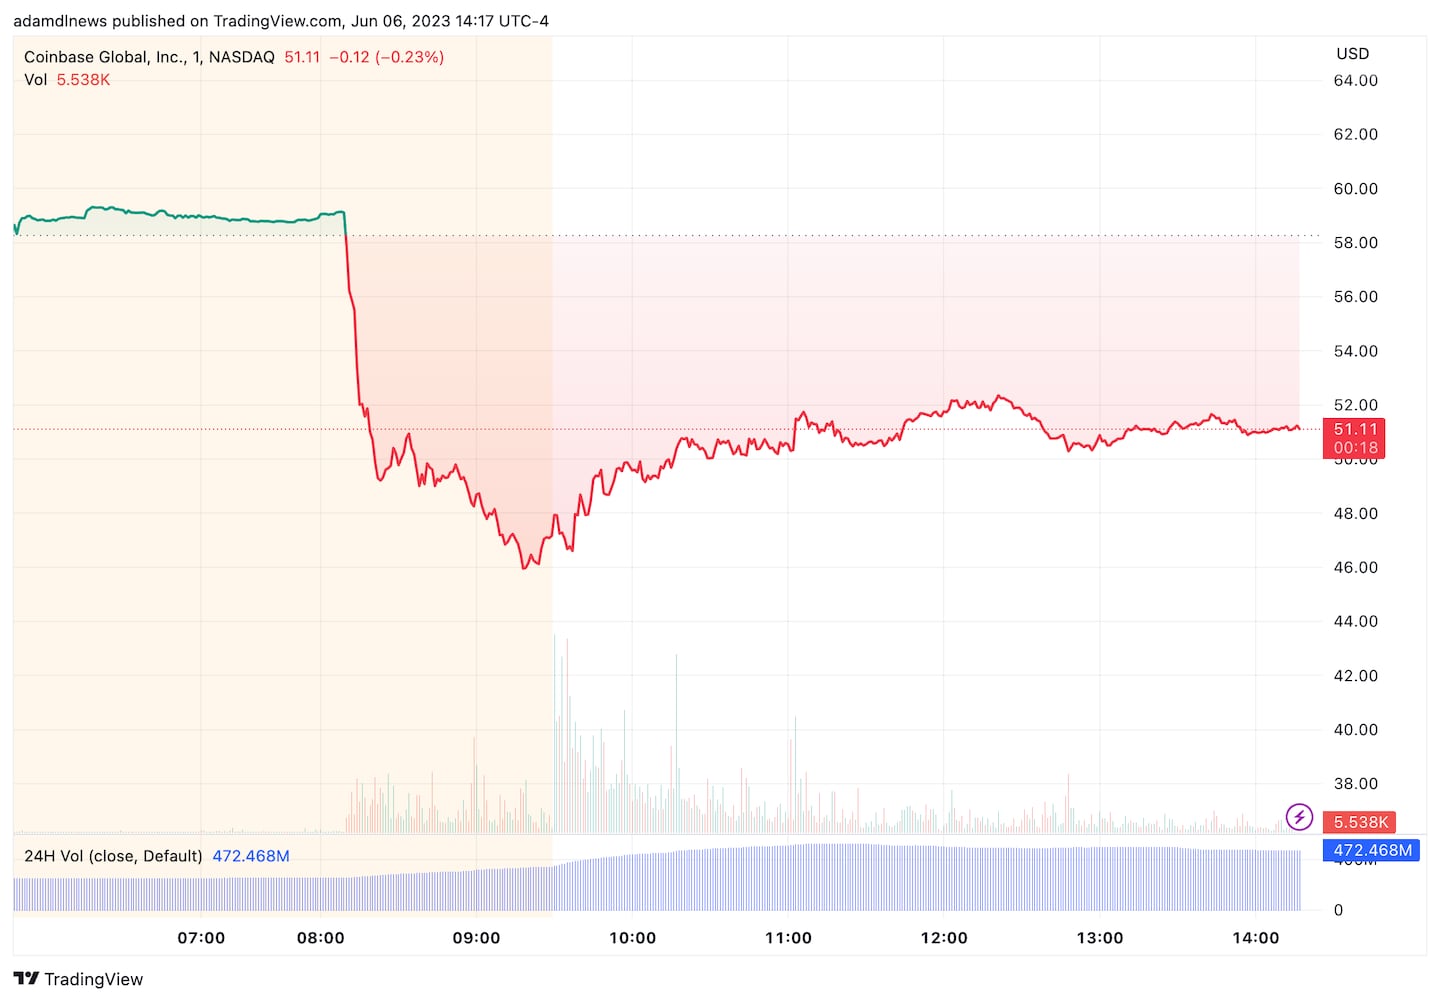 Coinbase shares plunged on Tuesday.